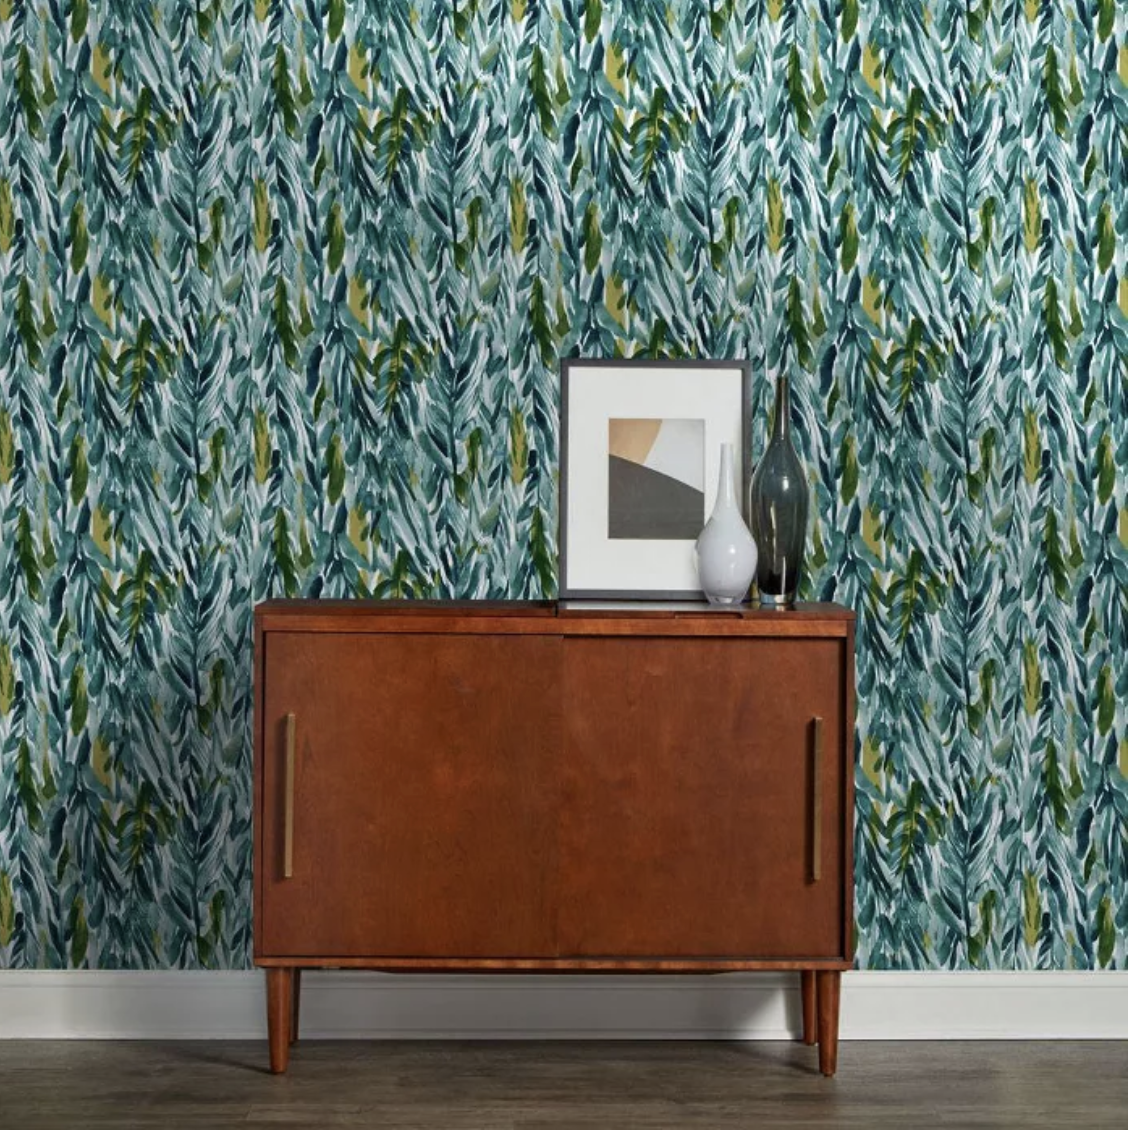 Green, blue, and teal leaf patterned wall behind hutch